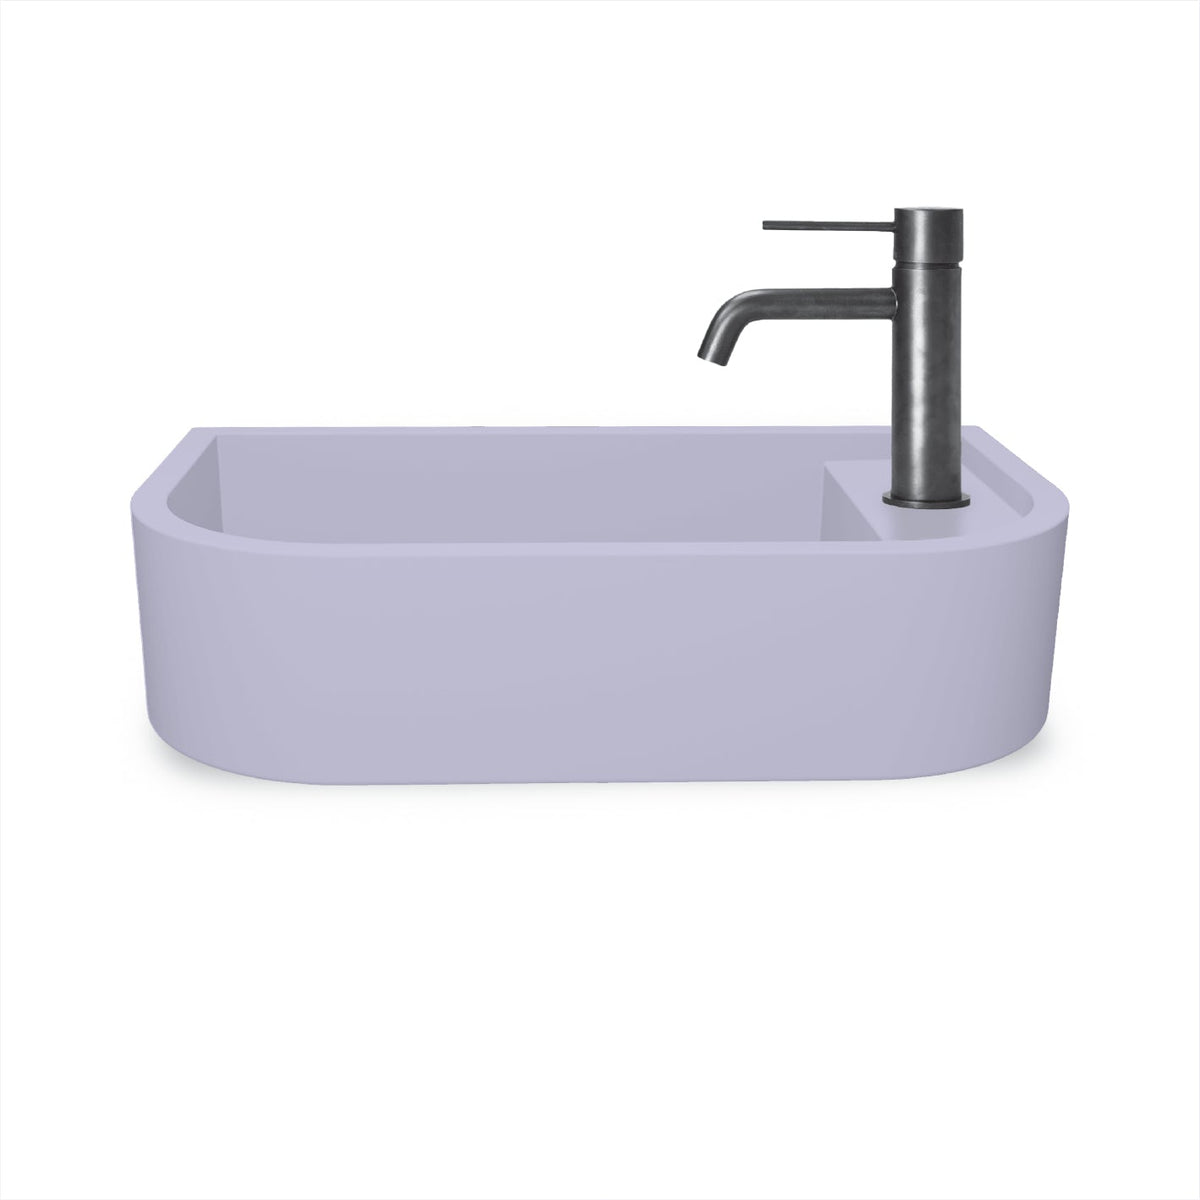 Loop 02 Basin - Overflow - Surface Mount (Lilac,Tap Hole,Chrome)